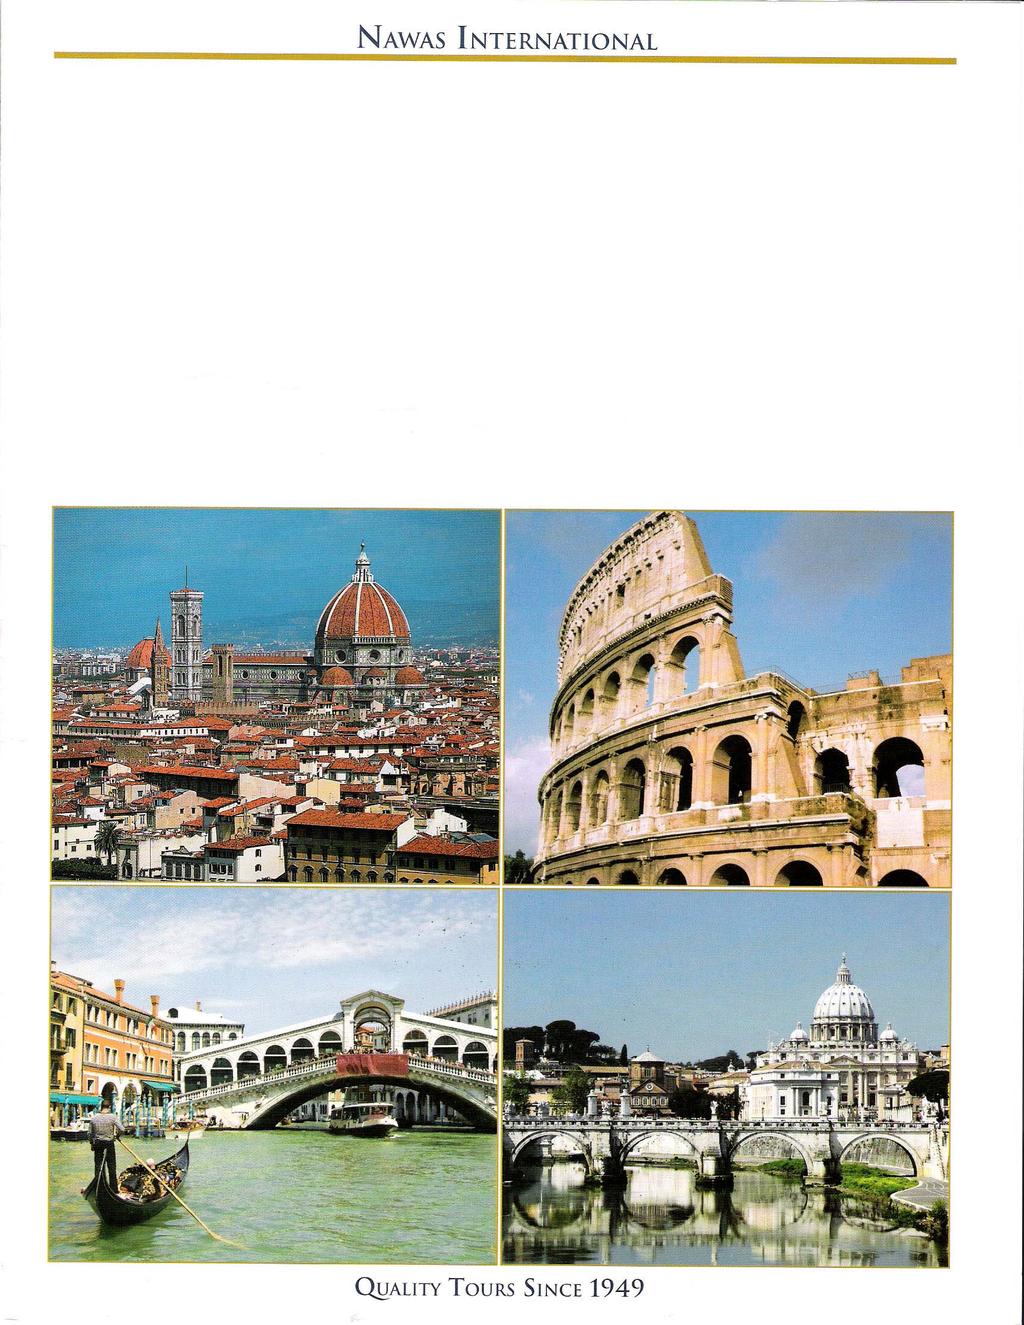 THE BEST OF ITALY 11 Days: October 28 - November 7, 2015 visiting Venice Florence Assisi Rome hosted by John Findlater